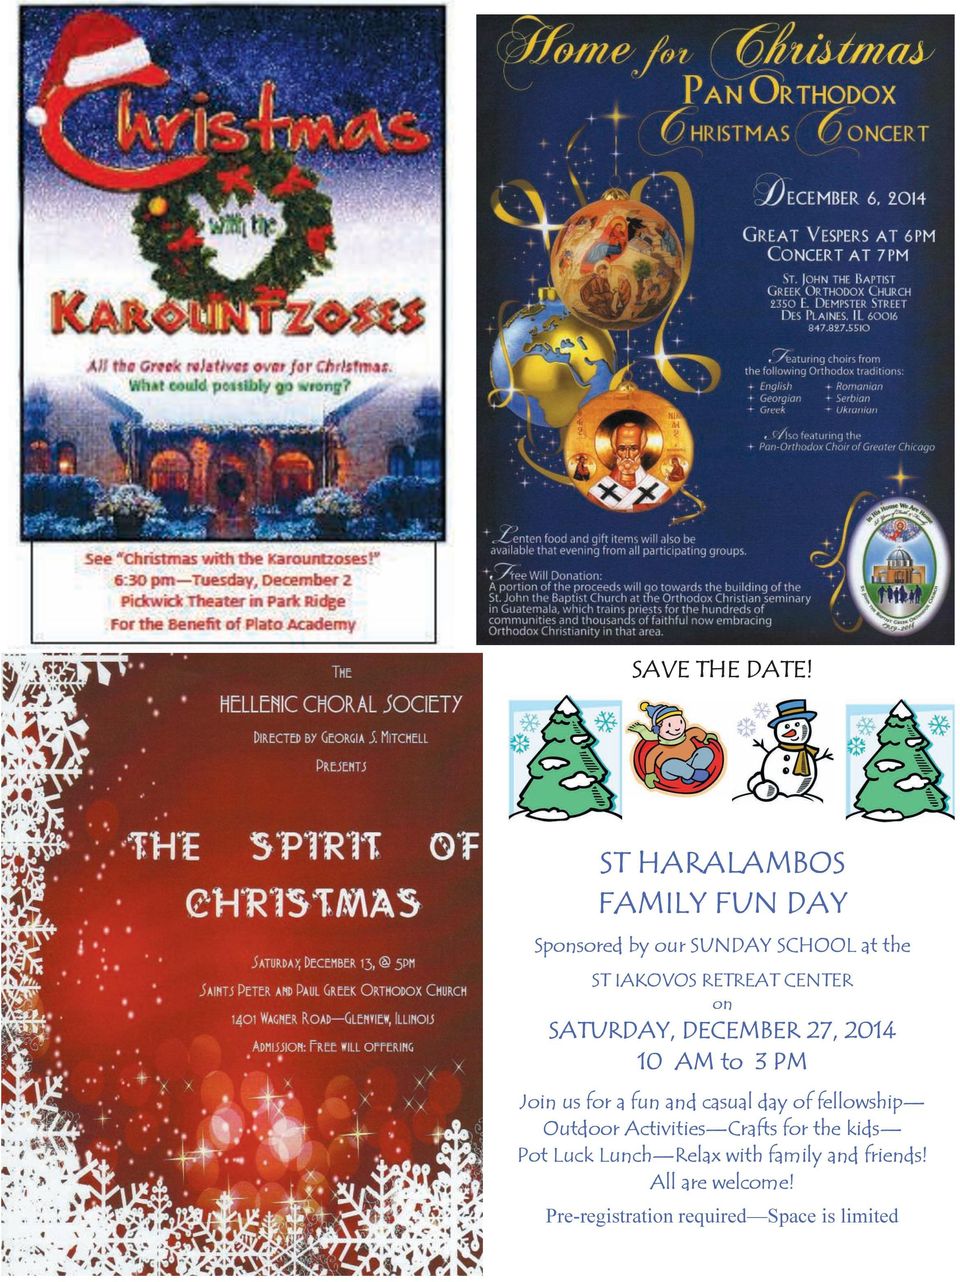 CENTER on SATURDAY, DECEMBER 27, 2014 10 AM to 3 PM Join us for a fun and casual day